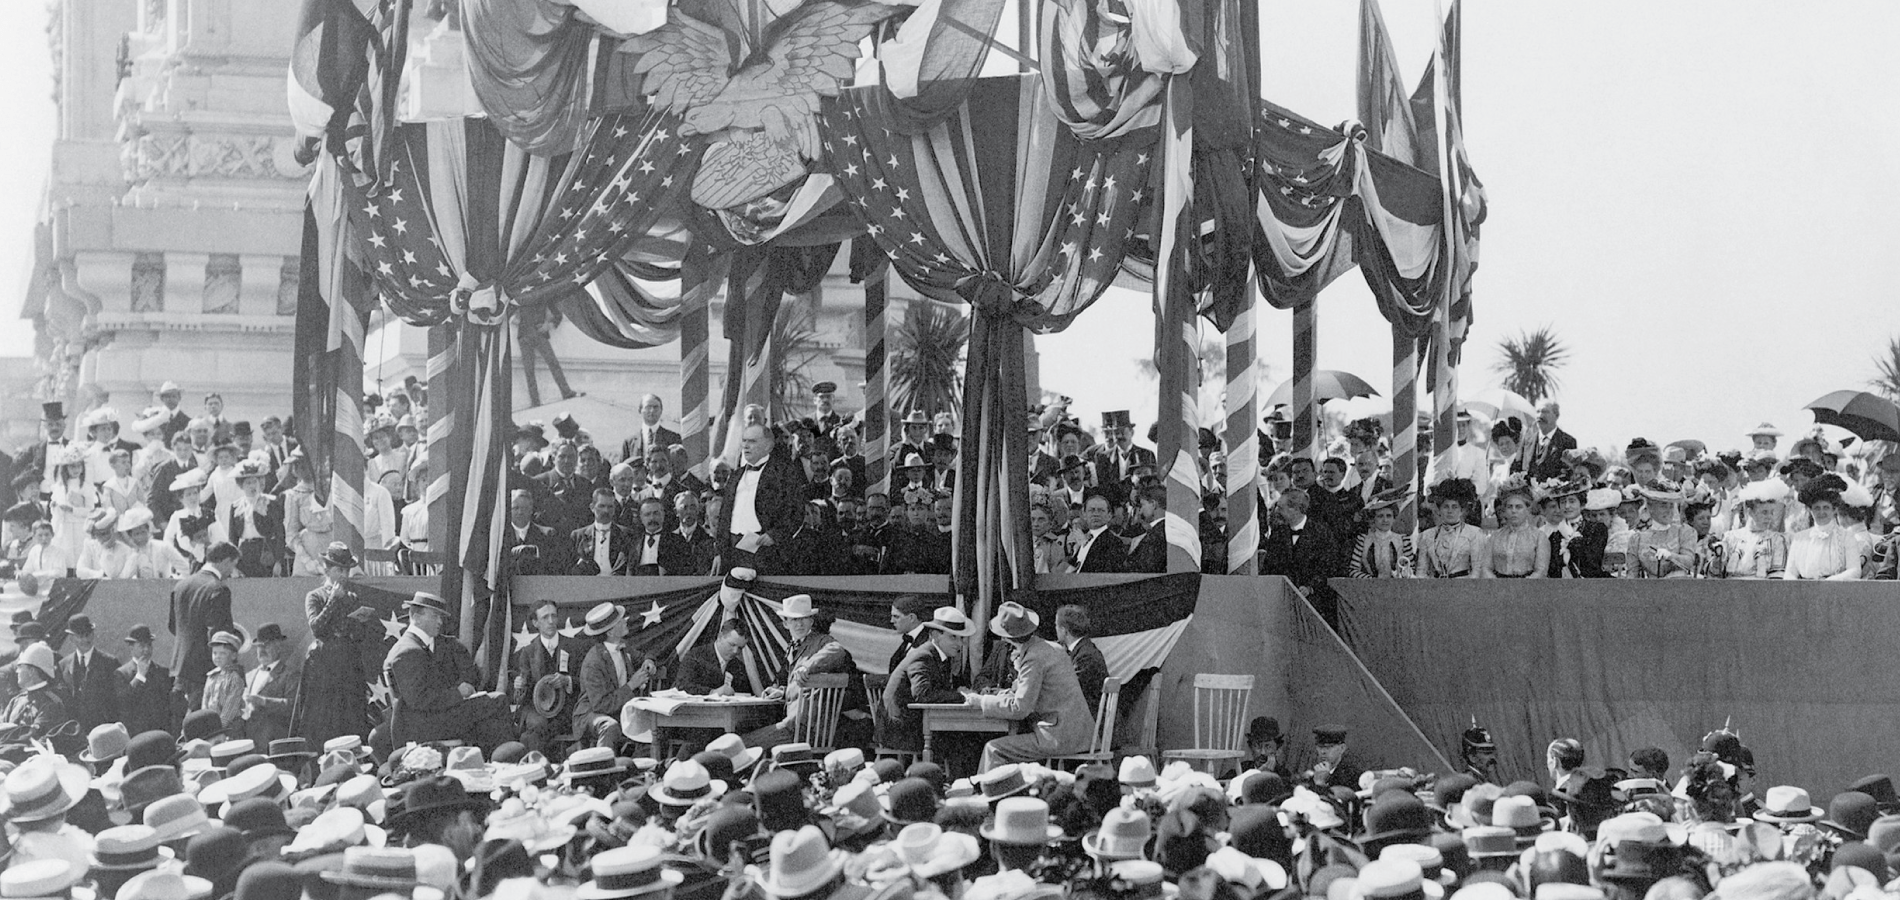 photo from William McKinley's final address at the Pan-American Exposition in Buffalo, New York in 1901